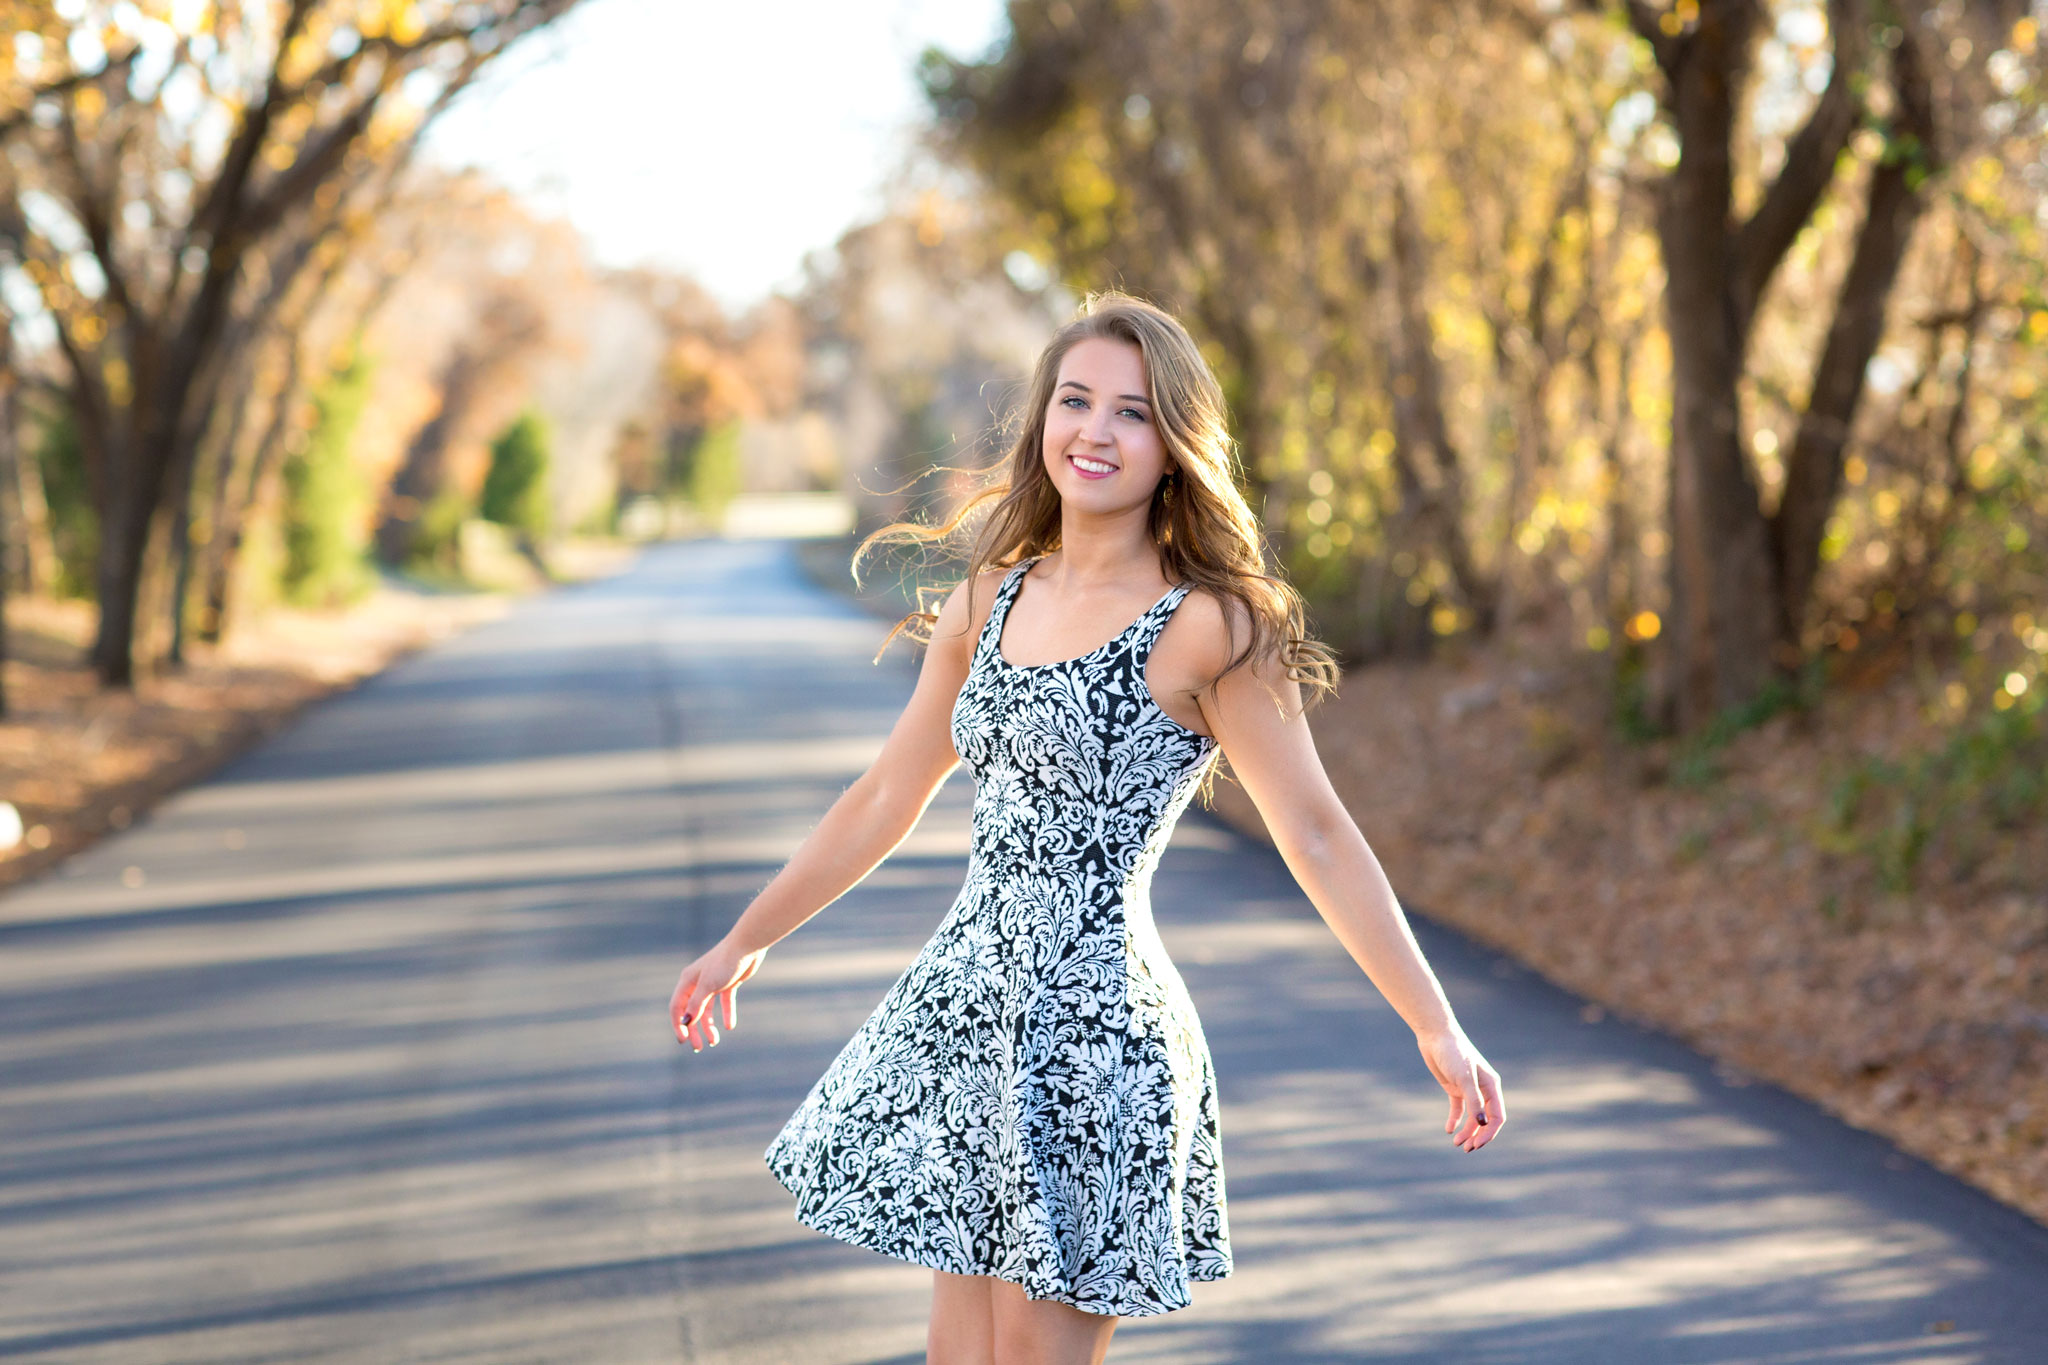 Girl wearing dress and posing on a road